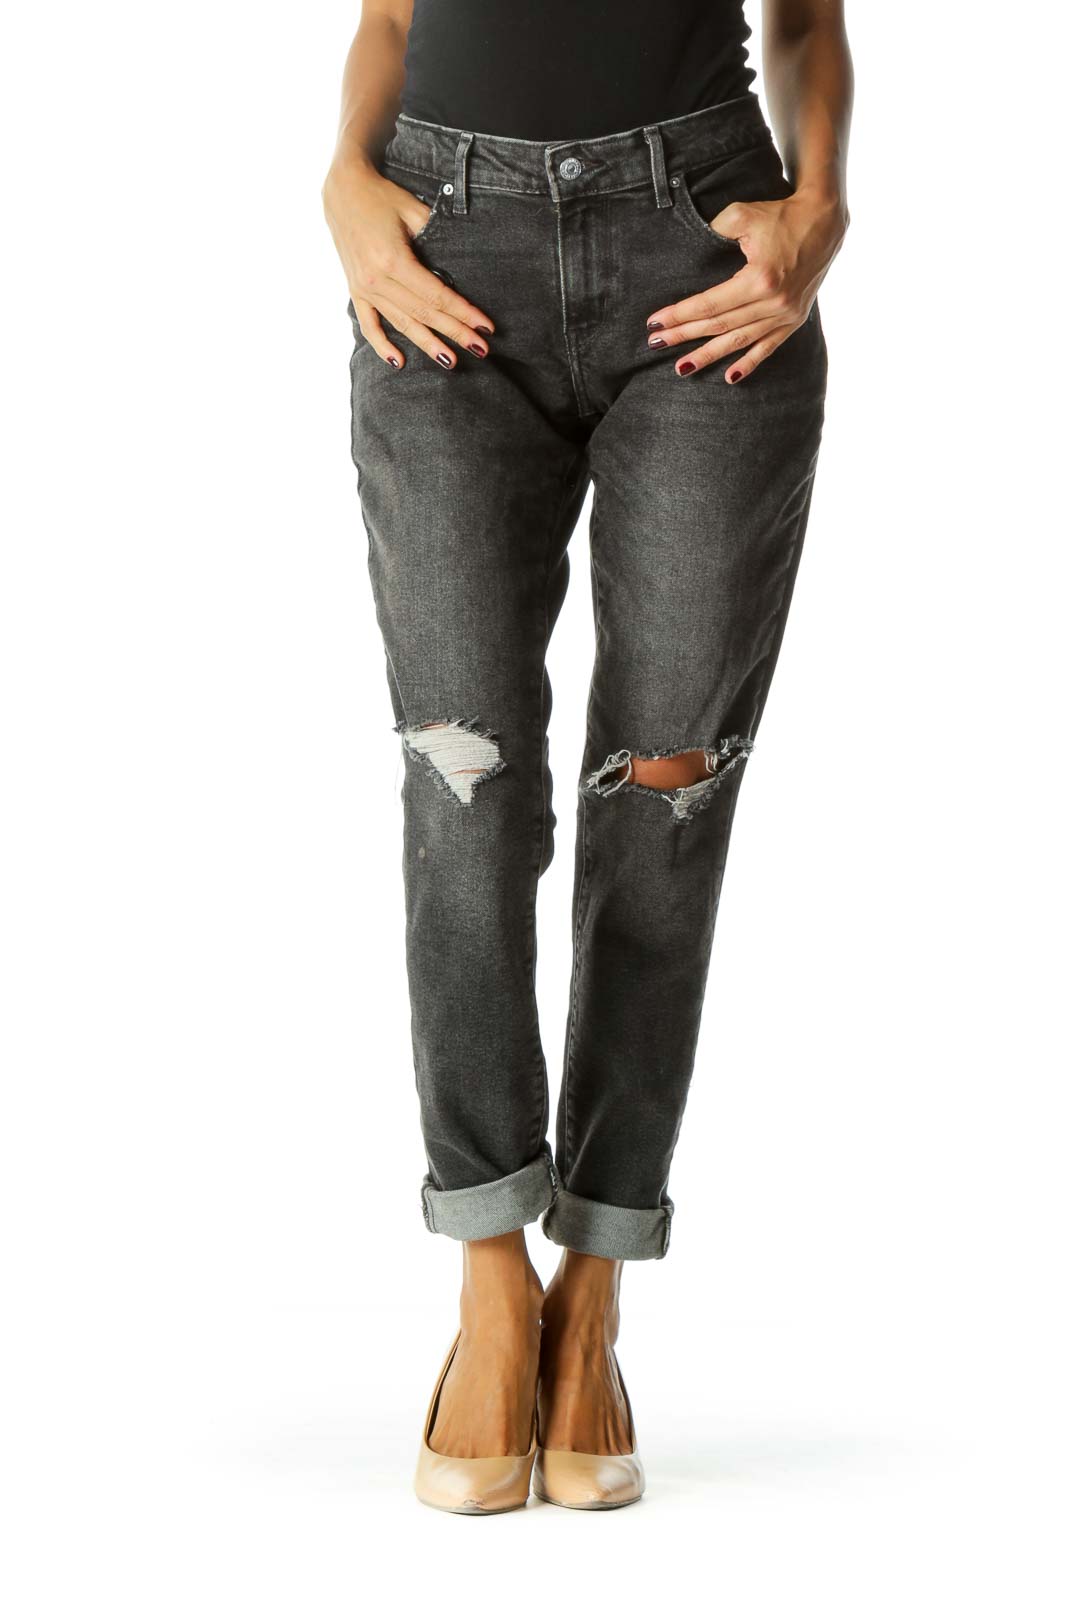 Black Distressed Mid-Rise Skinny Jeans Front